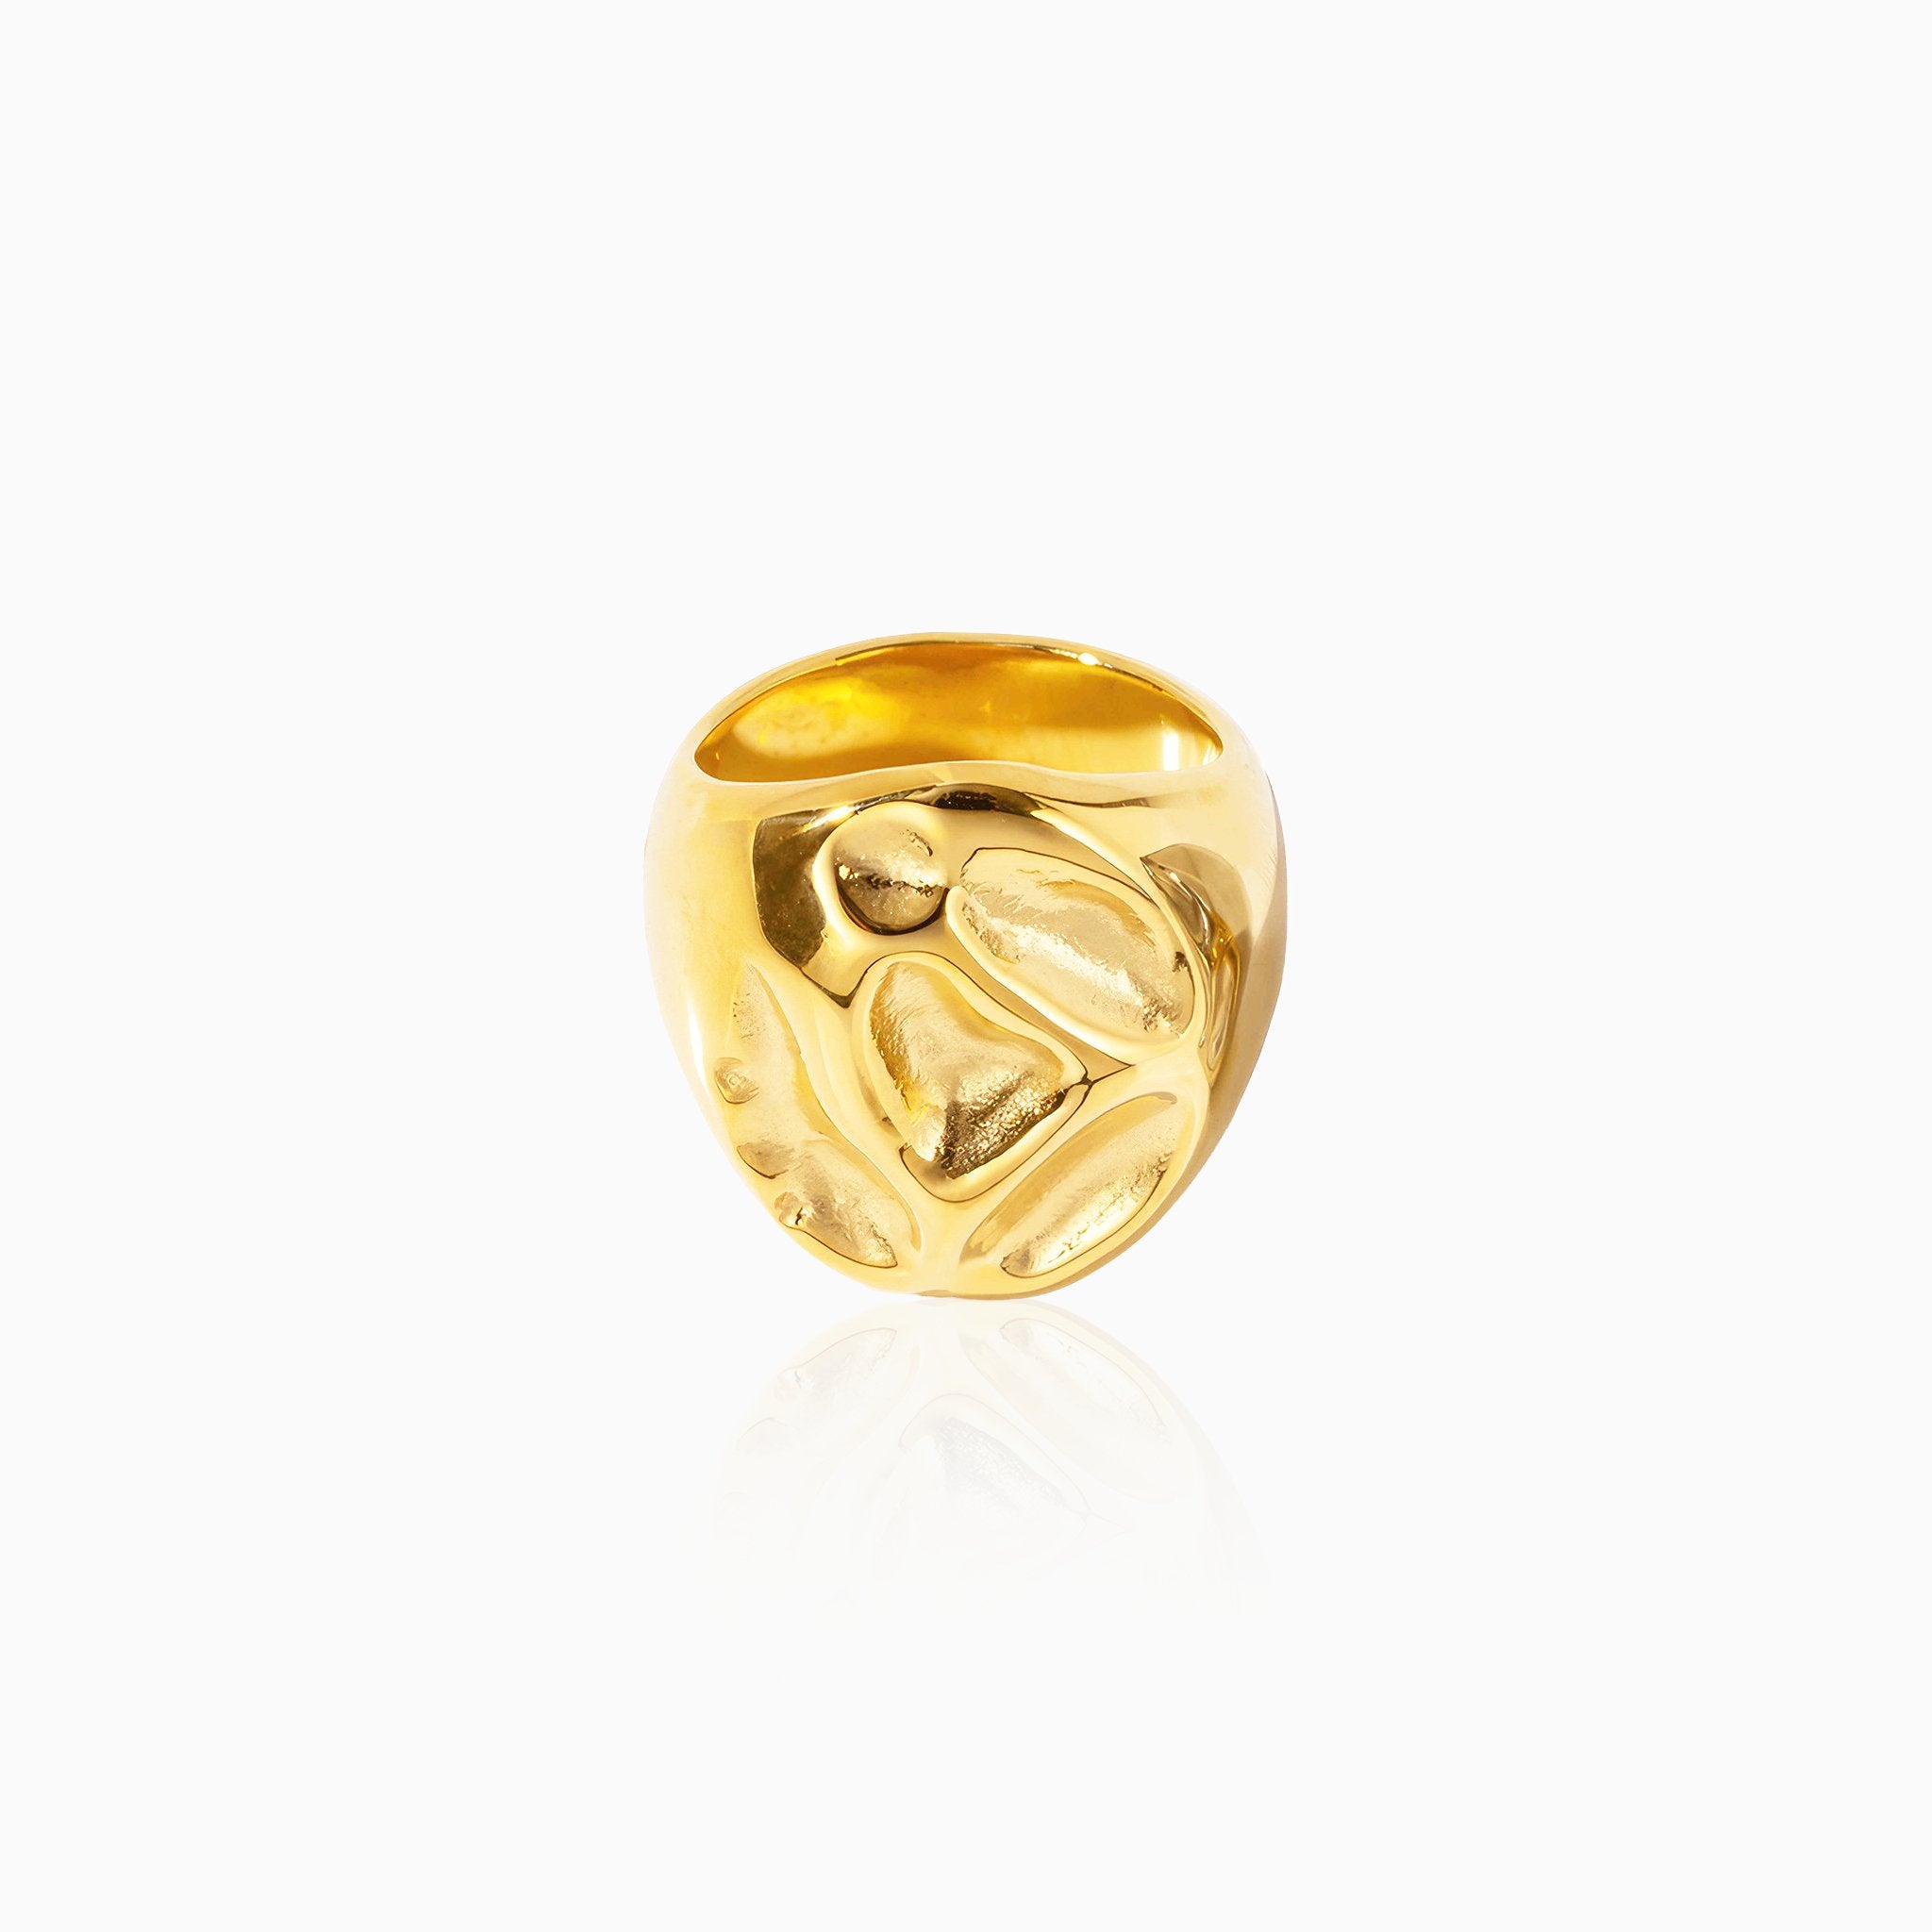 Lava Debossed Versatile Ring - Nobbier - Ring - 18K Gold And Titanium PVD Coated Jewelry